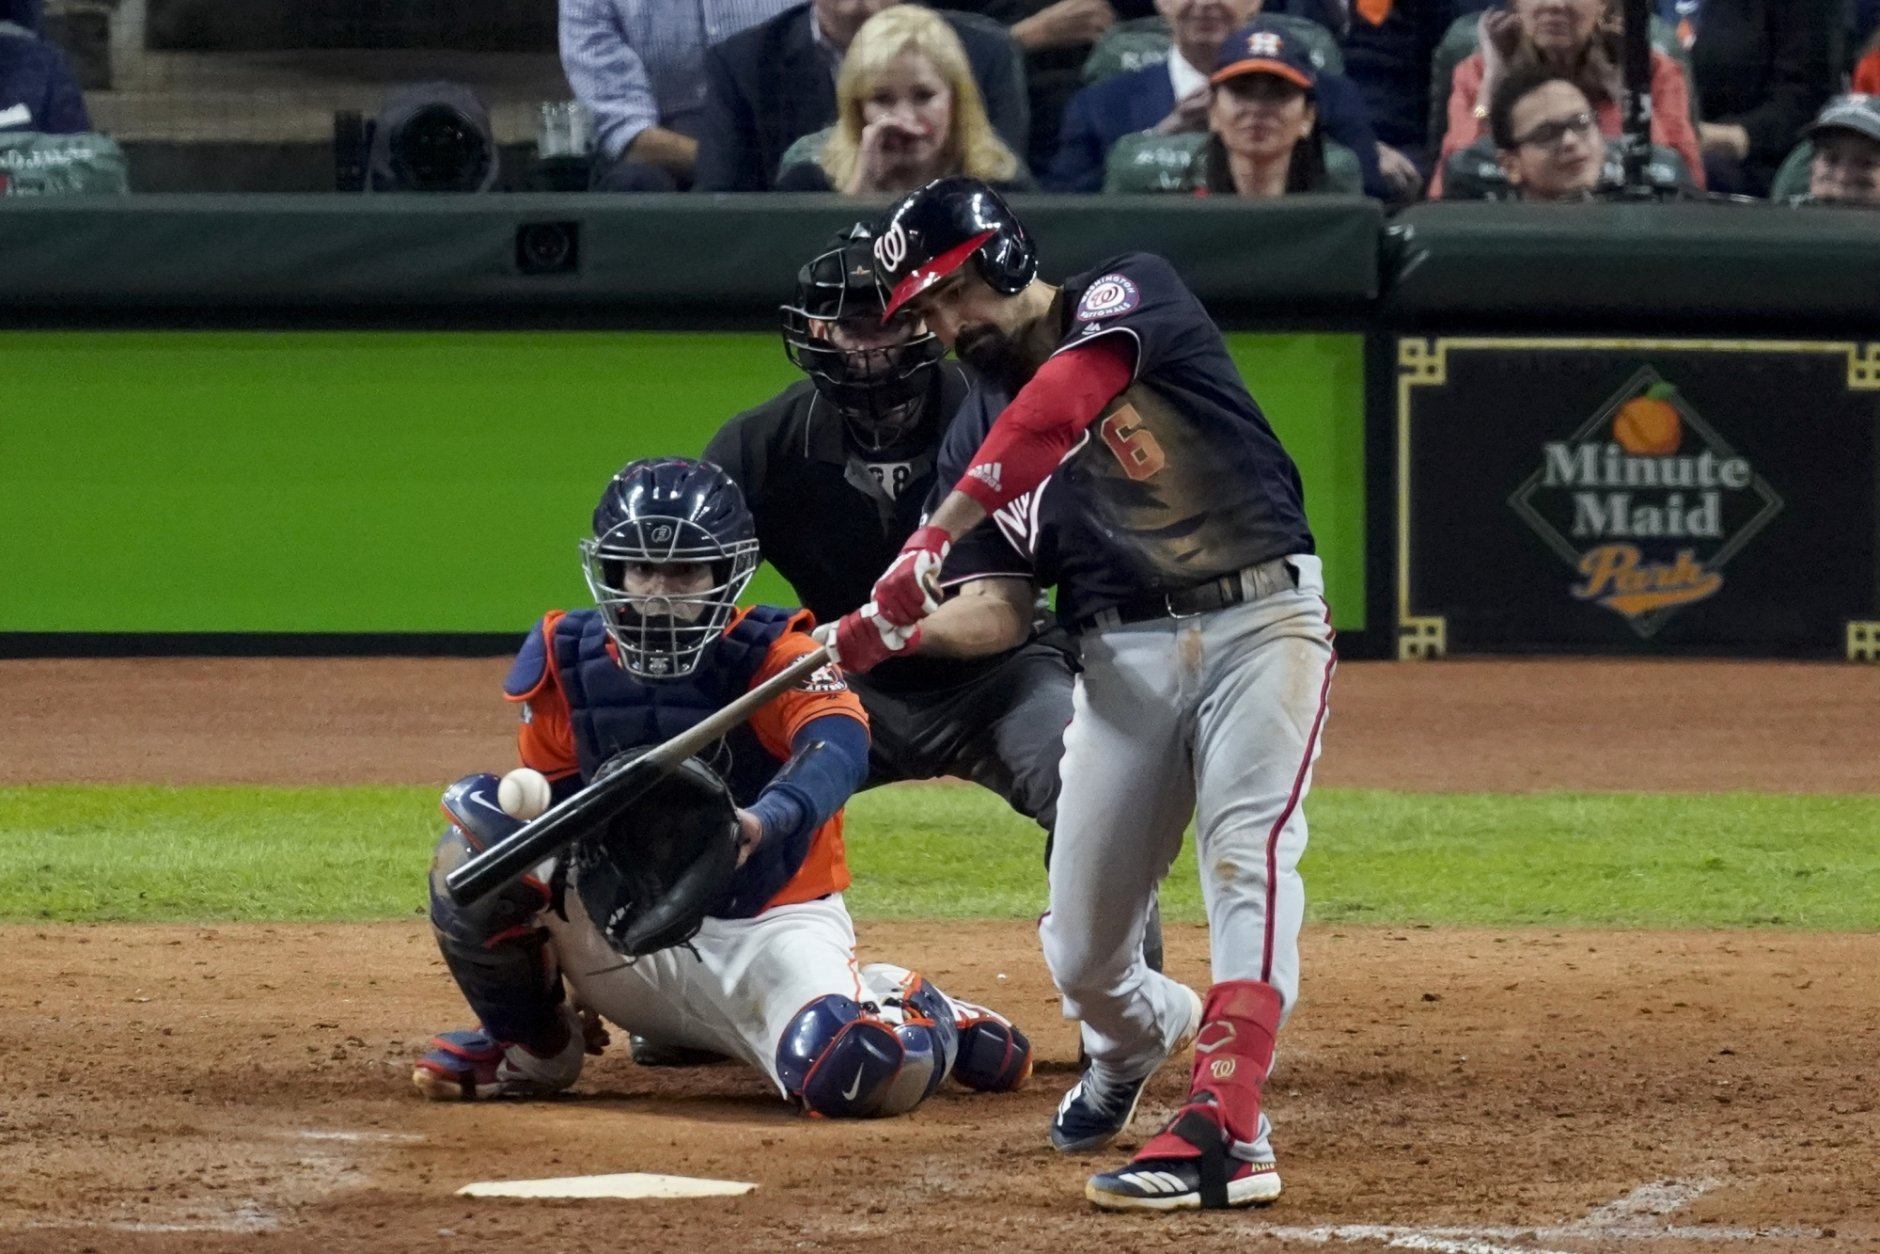 Soto, Nationals top Cole, Astros 5-4 in World Series opener - WTOP News